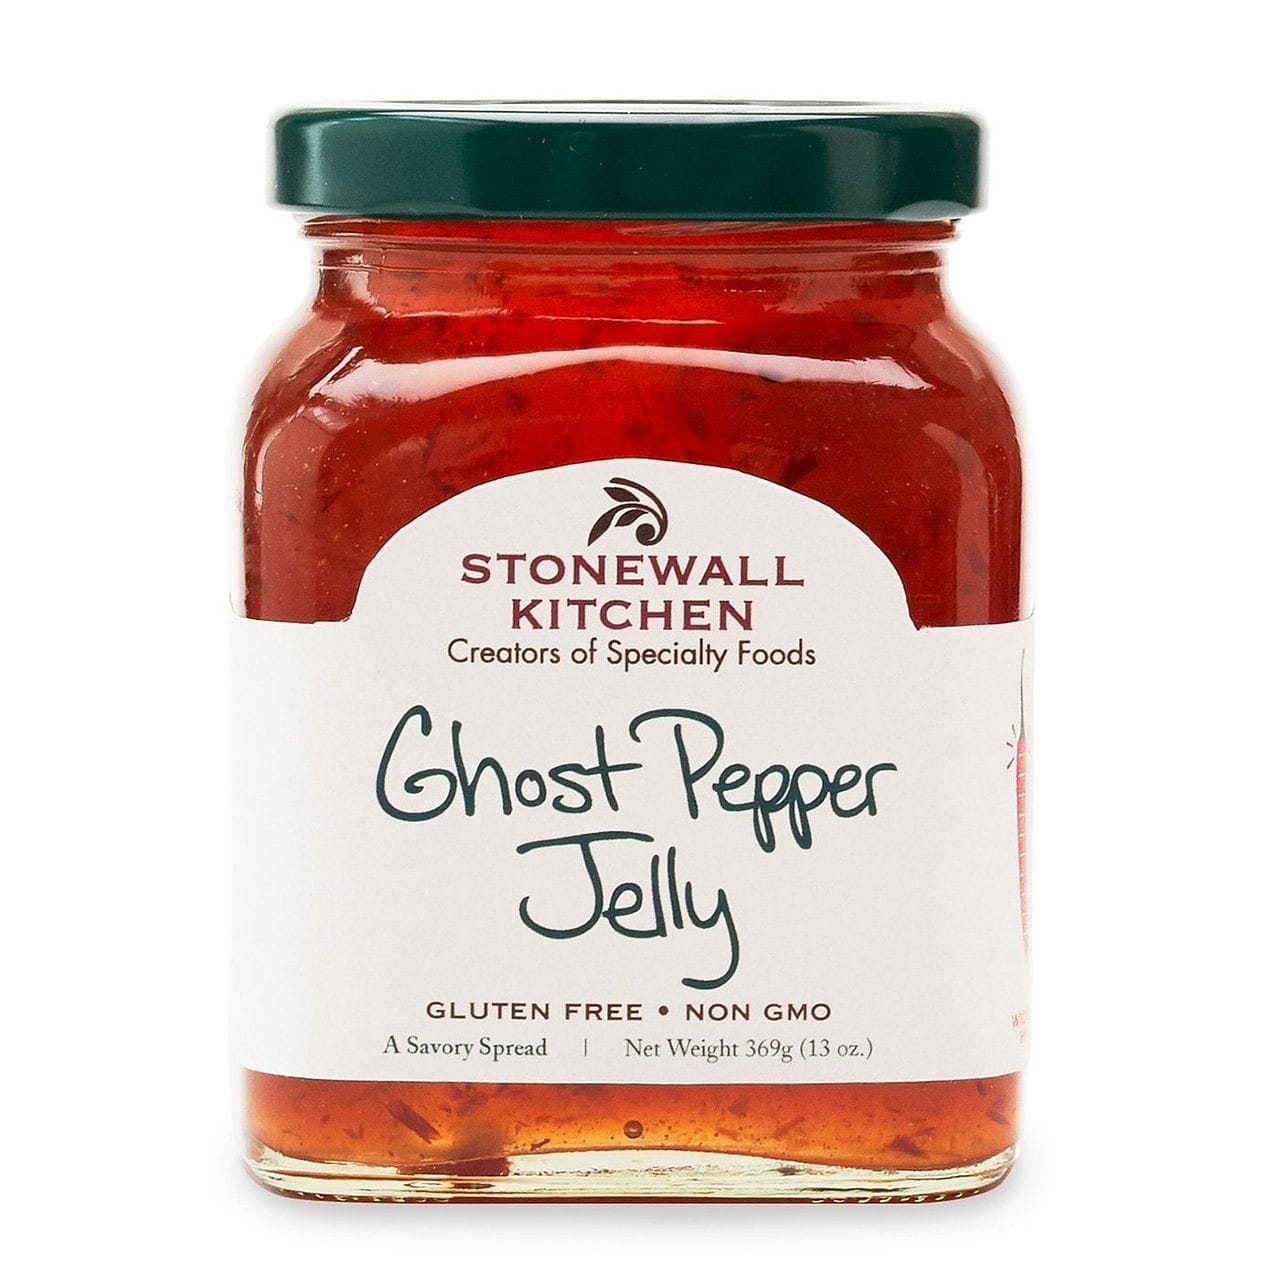 Stonewall Kitchen Ghost Pepper Jelly - 13 oz jar - Shelburne Country Store